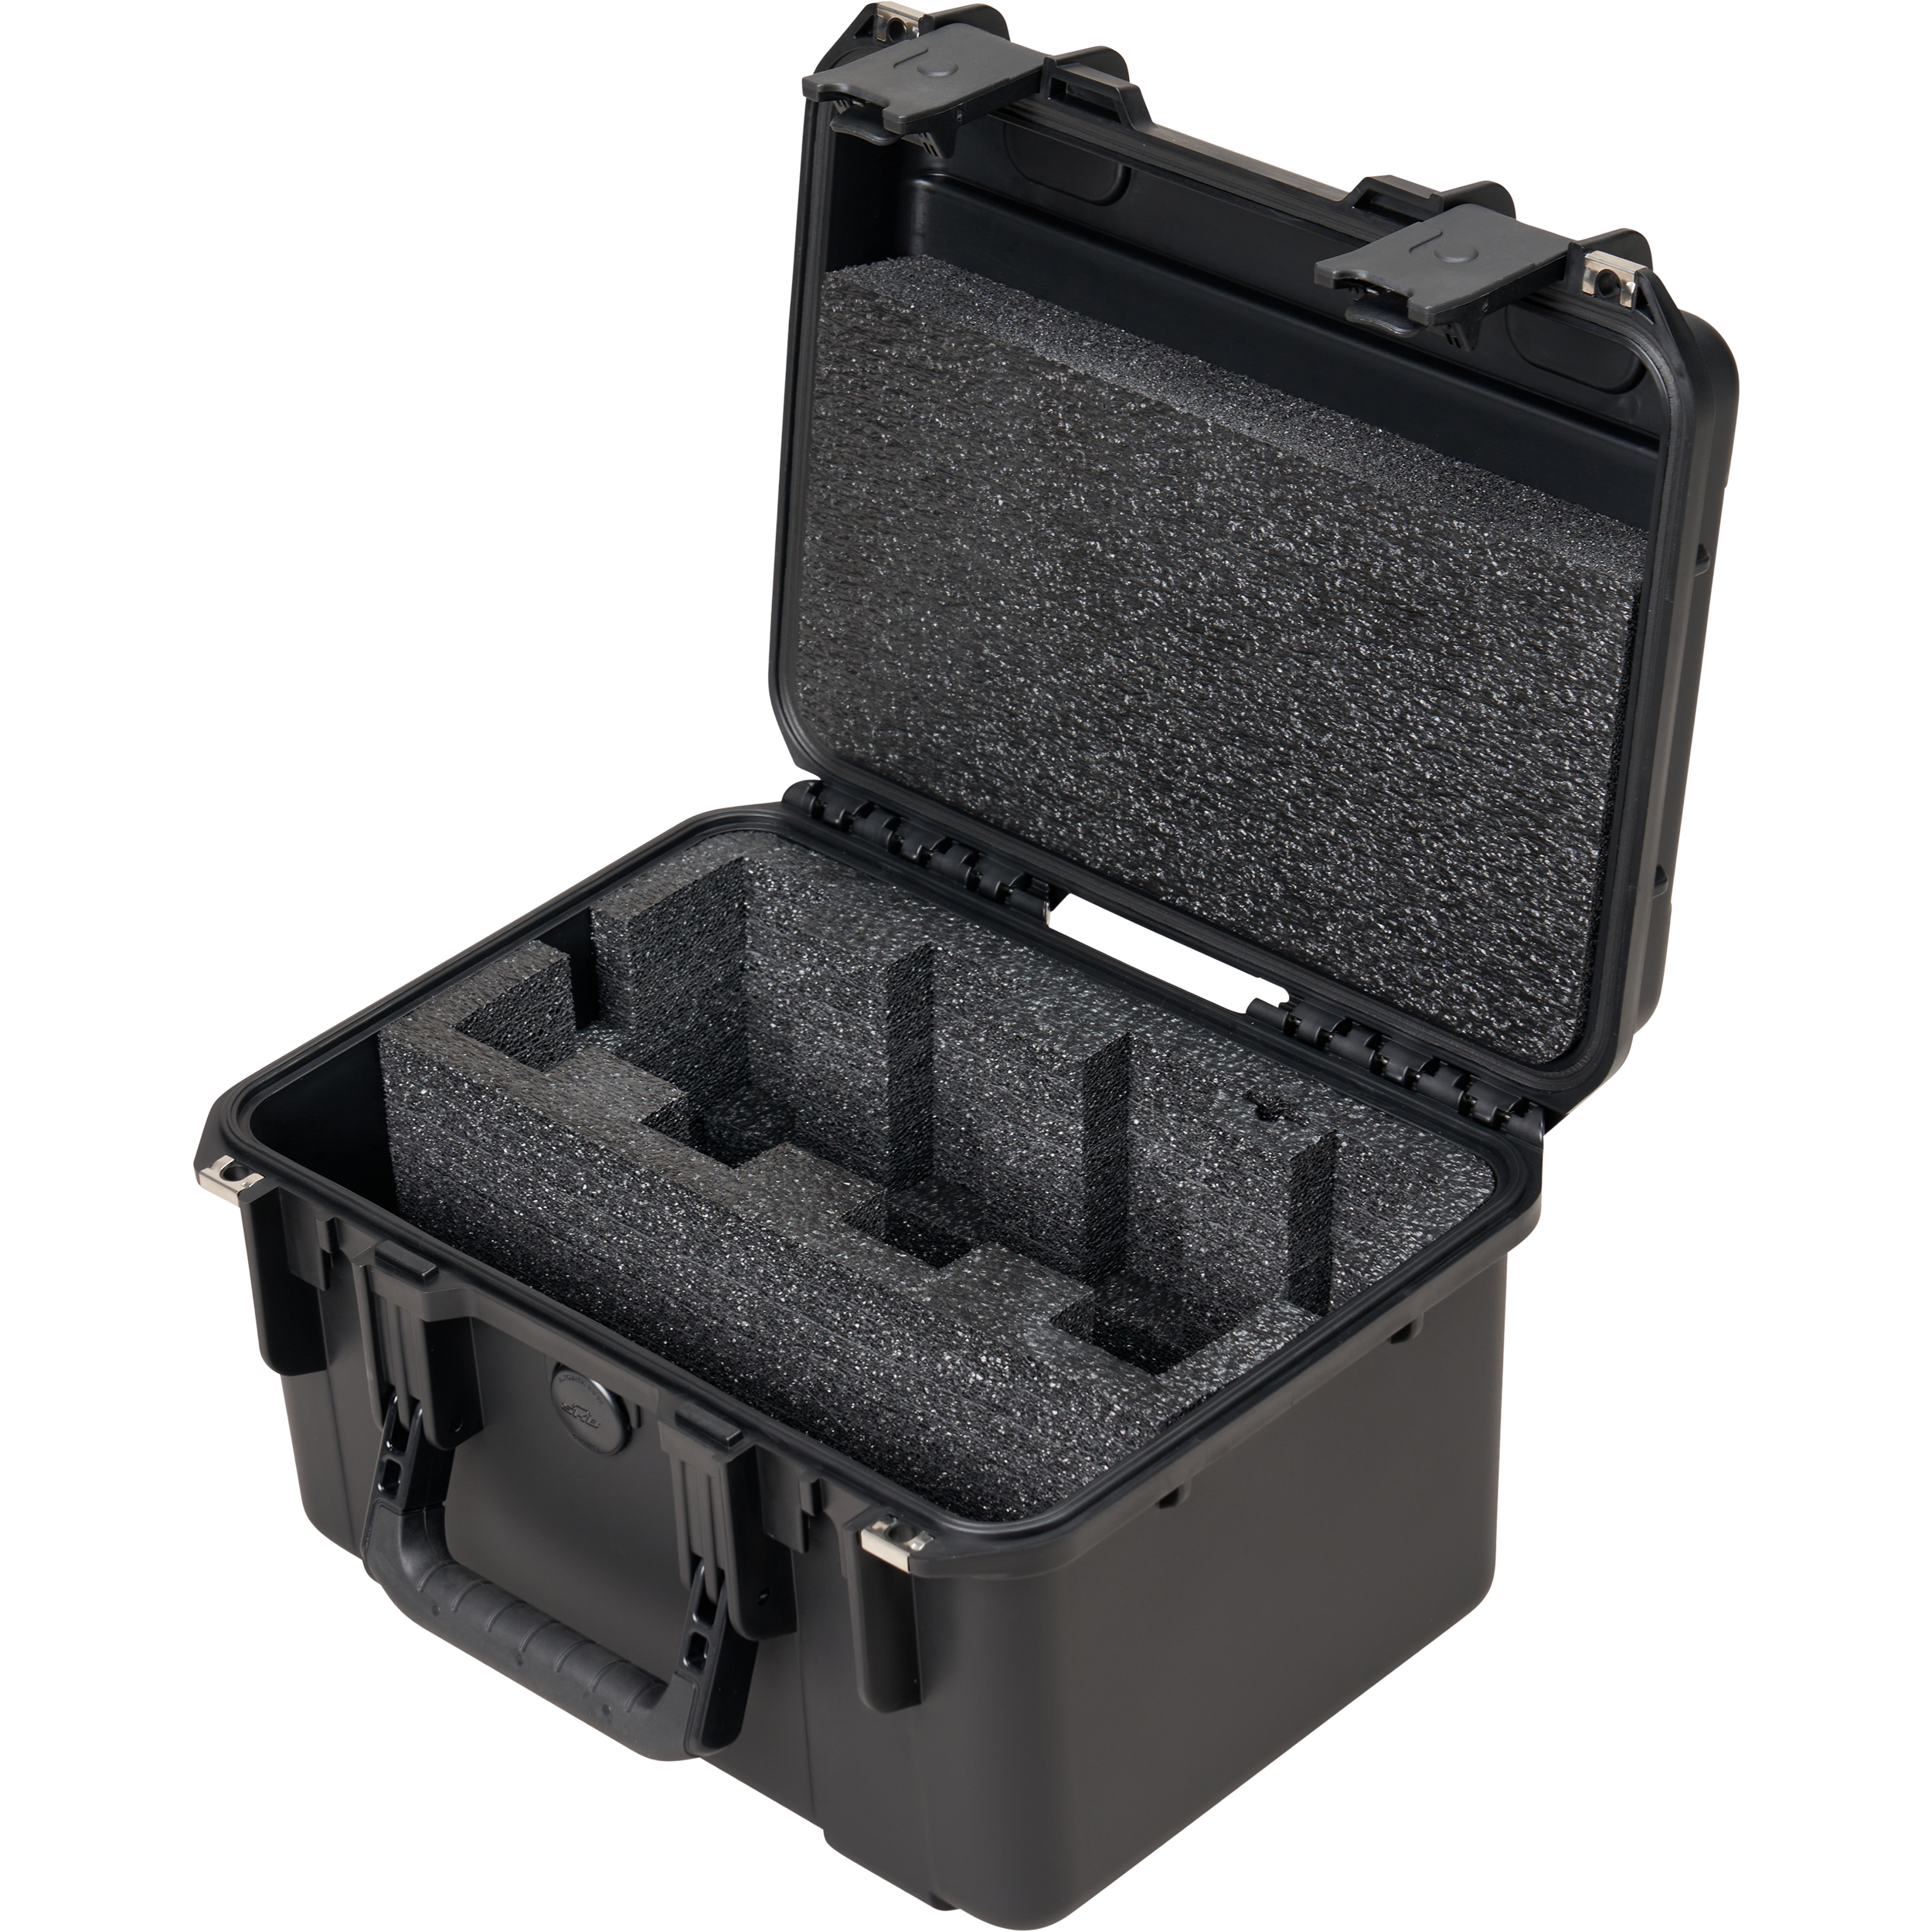 BYFP ipCase for 4x Radial Large Direct Boxes